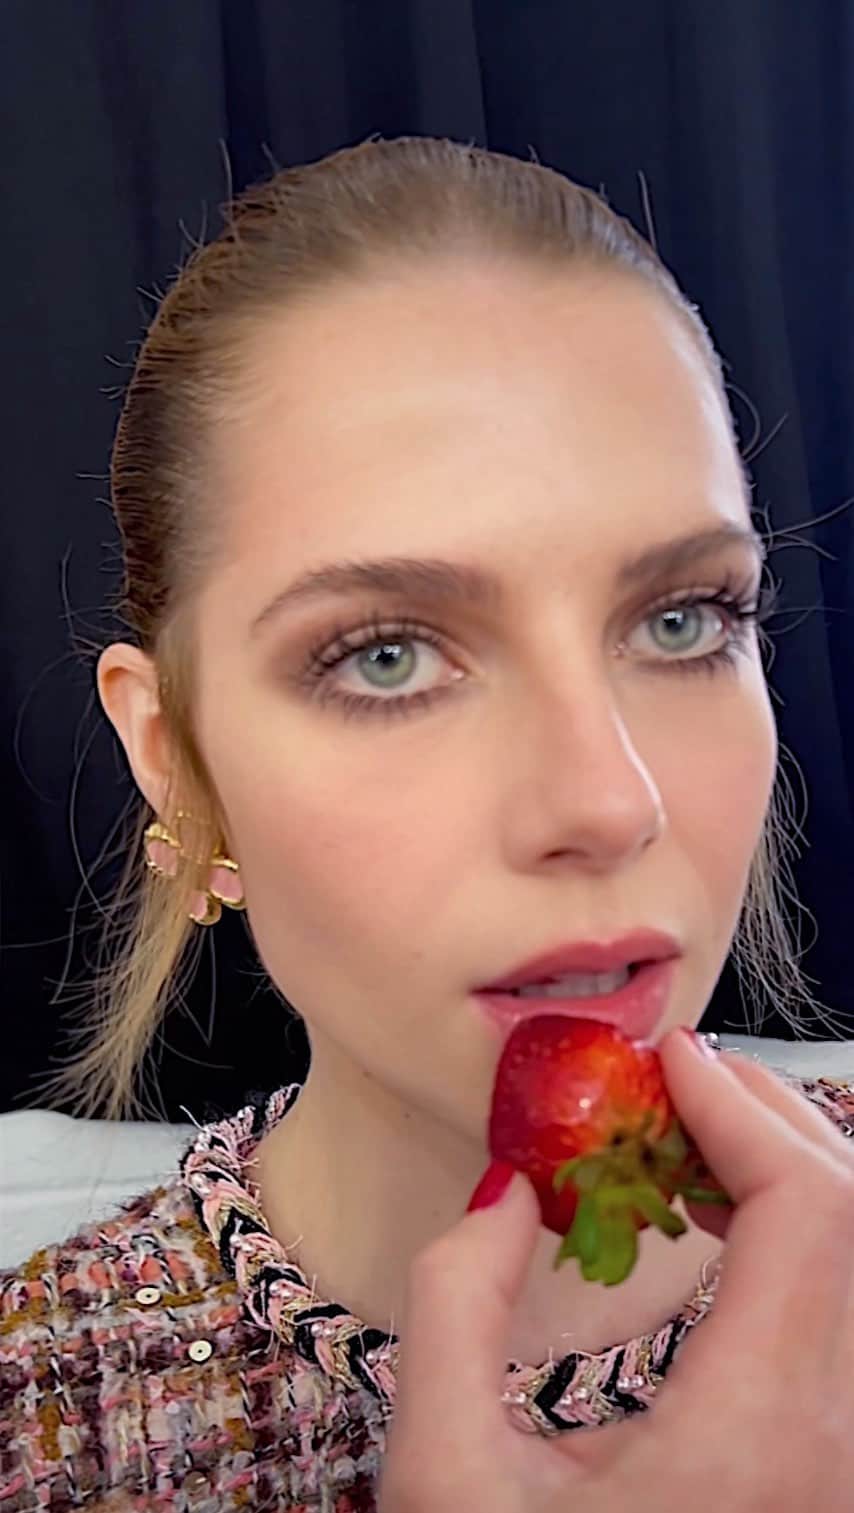 JO BAKERのインスタグラム：「L U C Y • B O Y N T O N 🇬🇧 Glazed strawberry juice lips on #lucyboynton for @harpersbazaargermany cover story 🍓  …back in spring before the #strawberrygirl #makeup trend went bananas viral ‼️  Always fun ..smiles and laughter with this iconic #london bird 🇬🇧❤️‼️  #style @chanelofficial  Hair @renatocampora  Makeup by me #jobakermakeupartist using #strawberries #desertroadtrip #eyeshadow palette + #tarantulash @bakeupbeauty 🥰‼️  #makeup #makeupoftheday #makeuptutorial #makeupaddict #makeuplover #makeuptricks #fruity #strawberries #harrysberries #makeupartist #makeuplook #makeupartistsworldwide #beautyhacks #beauty #tarantulash #lashes #eyes #instagood」